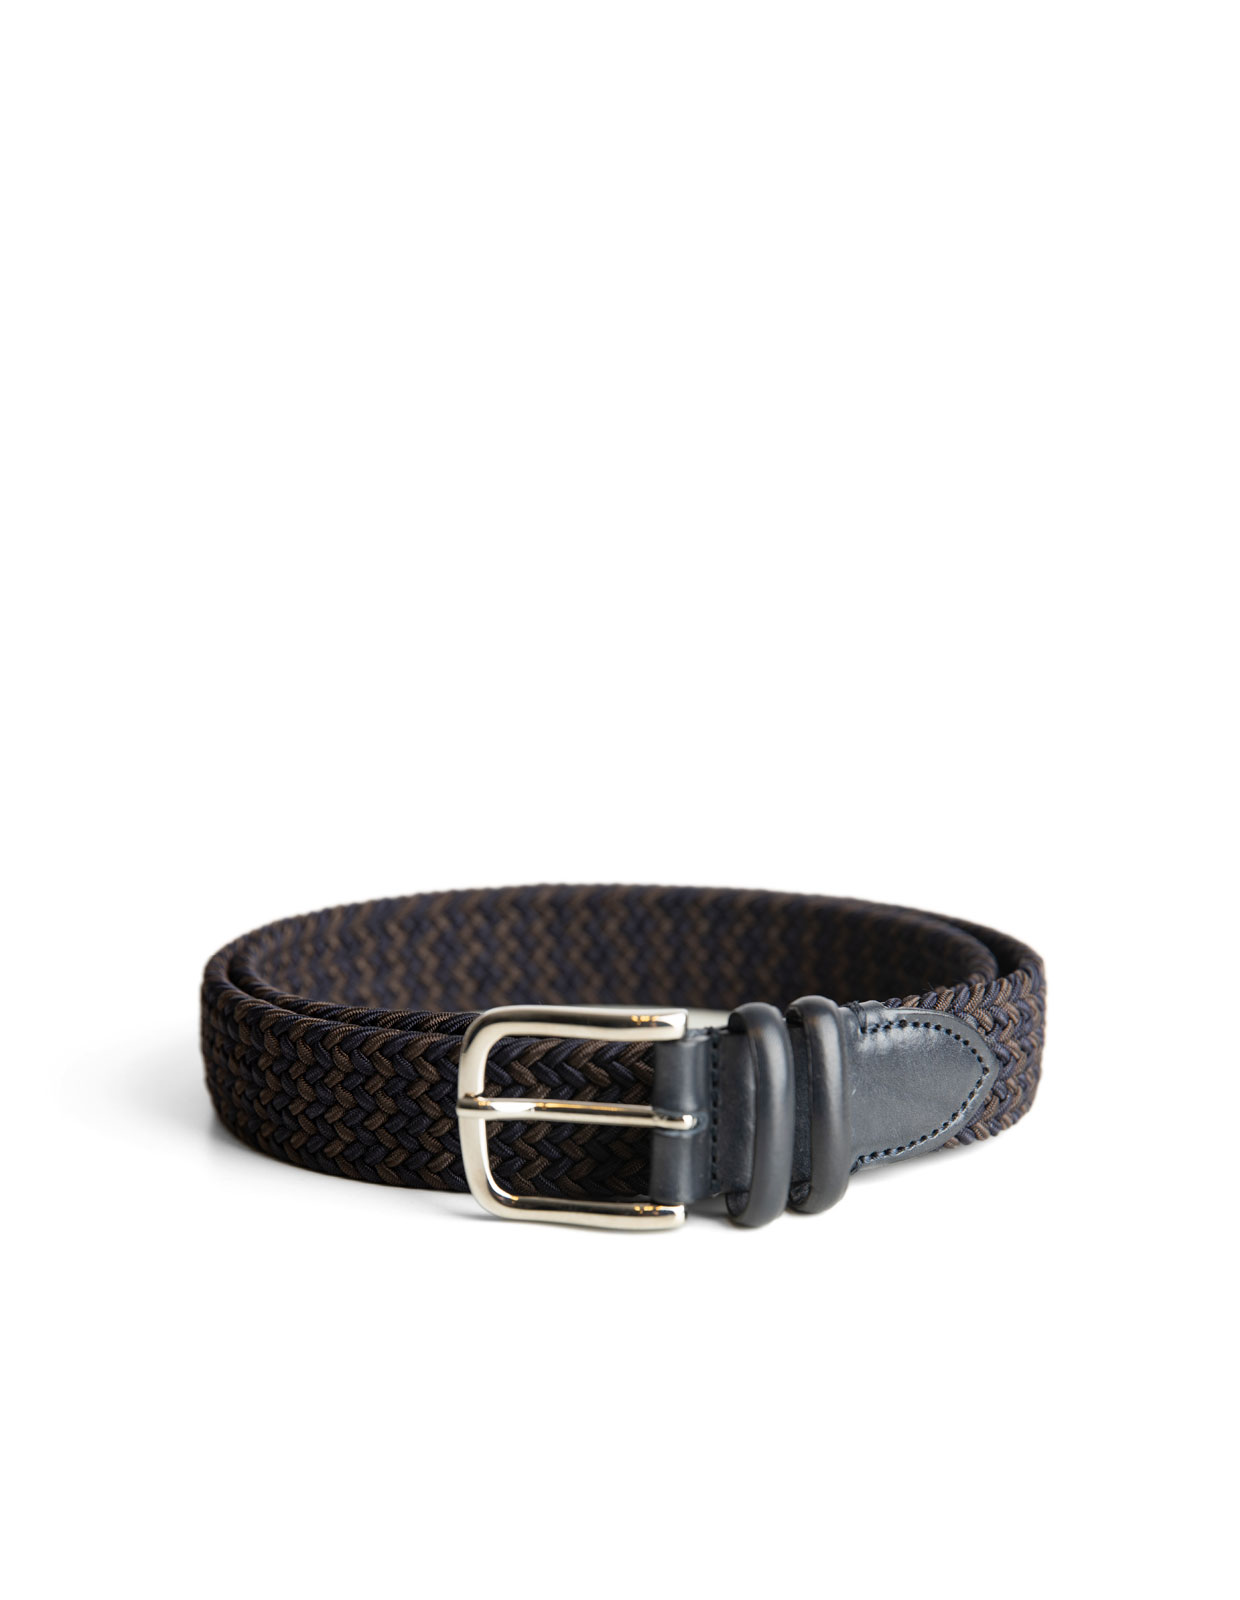 Woven Stretched Rayon Belt Navy/Brown Stl 90